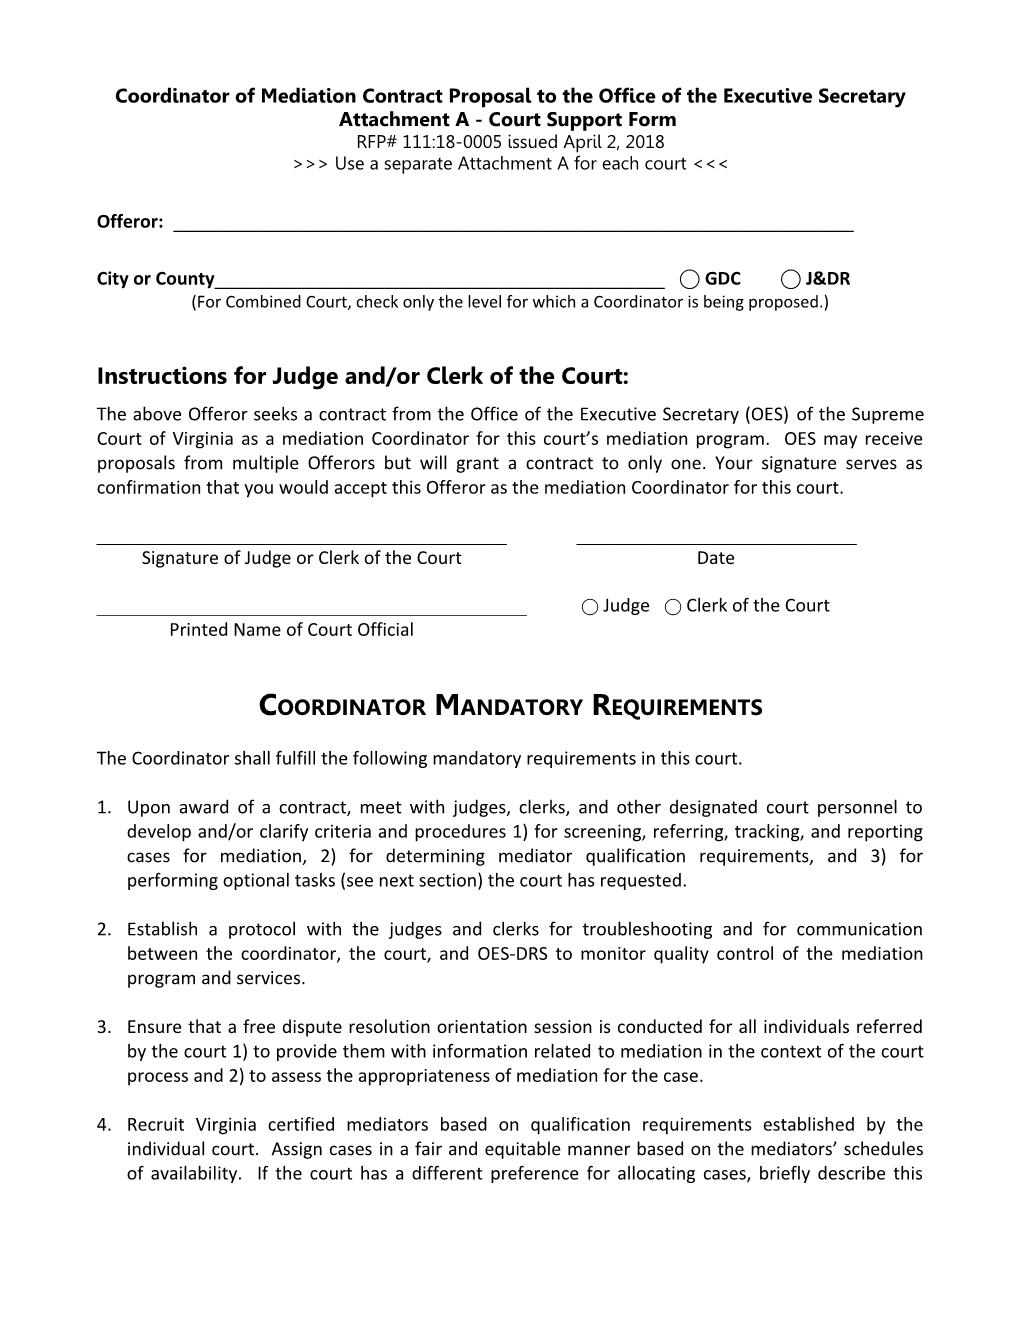 Request for Coordinator Form